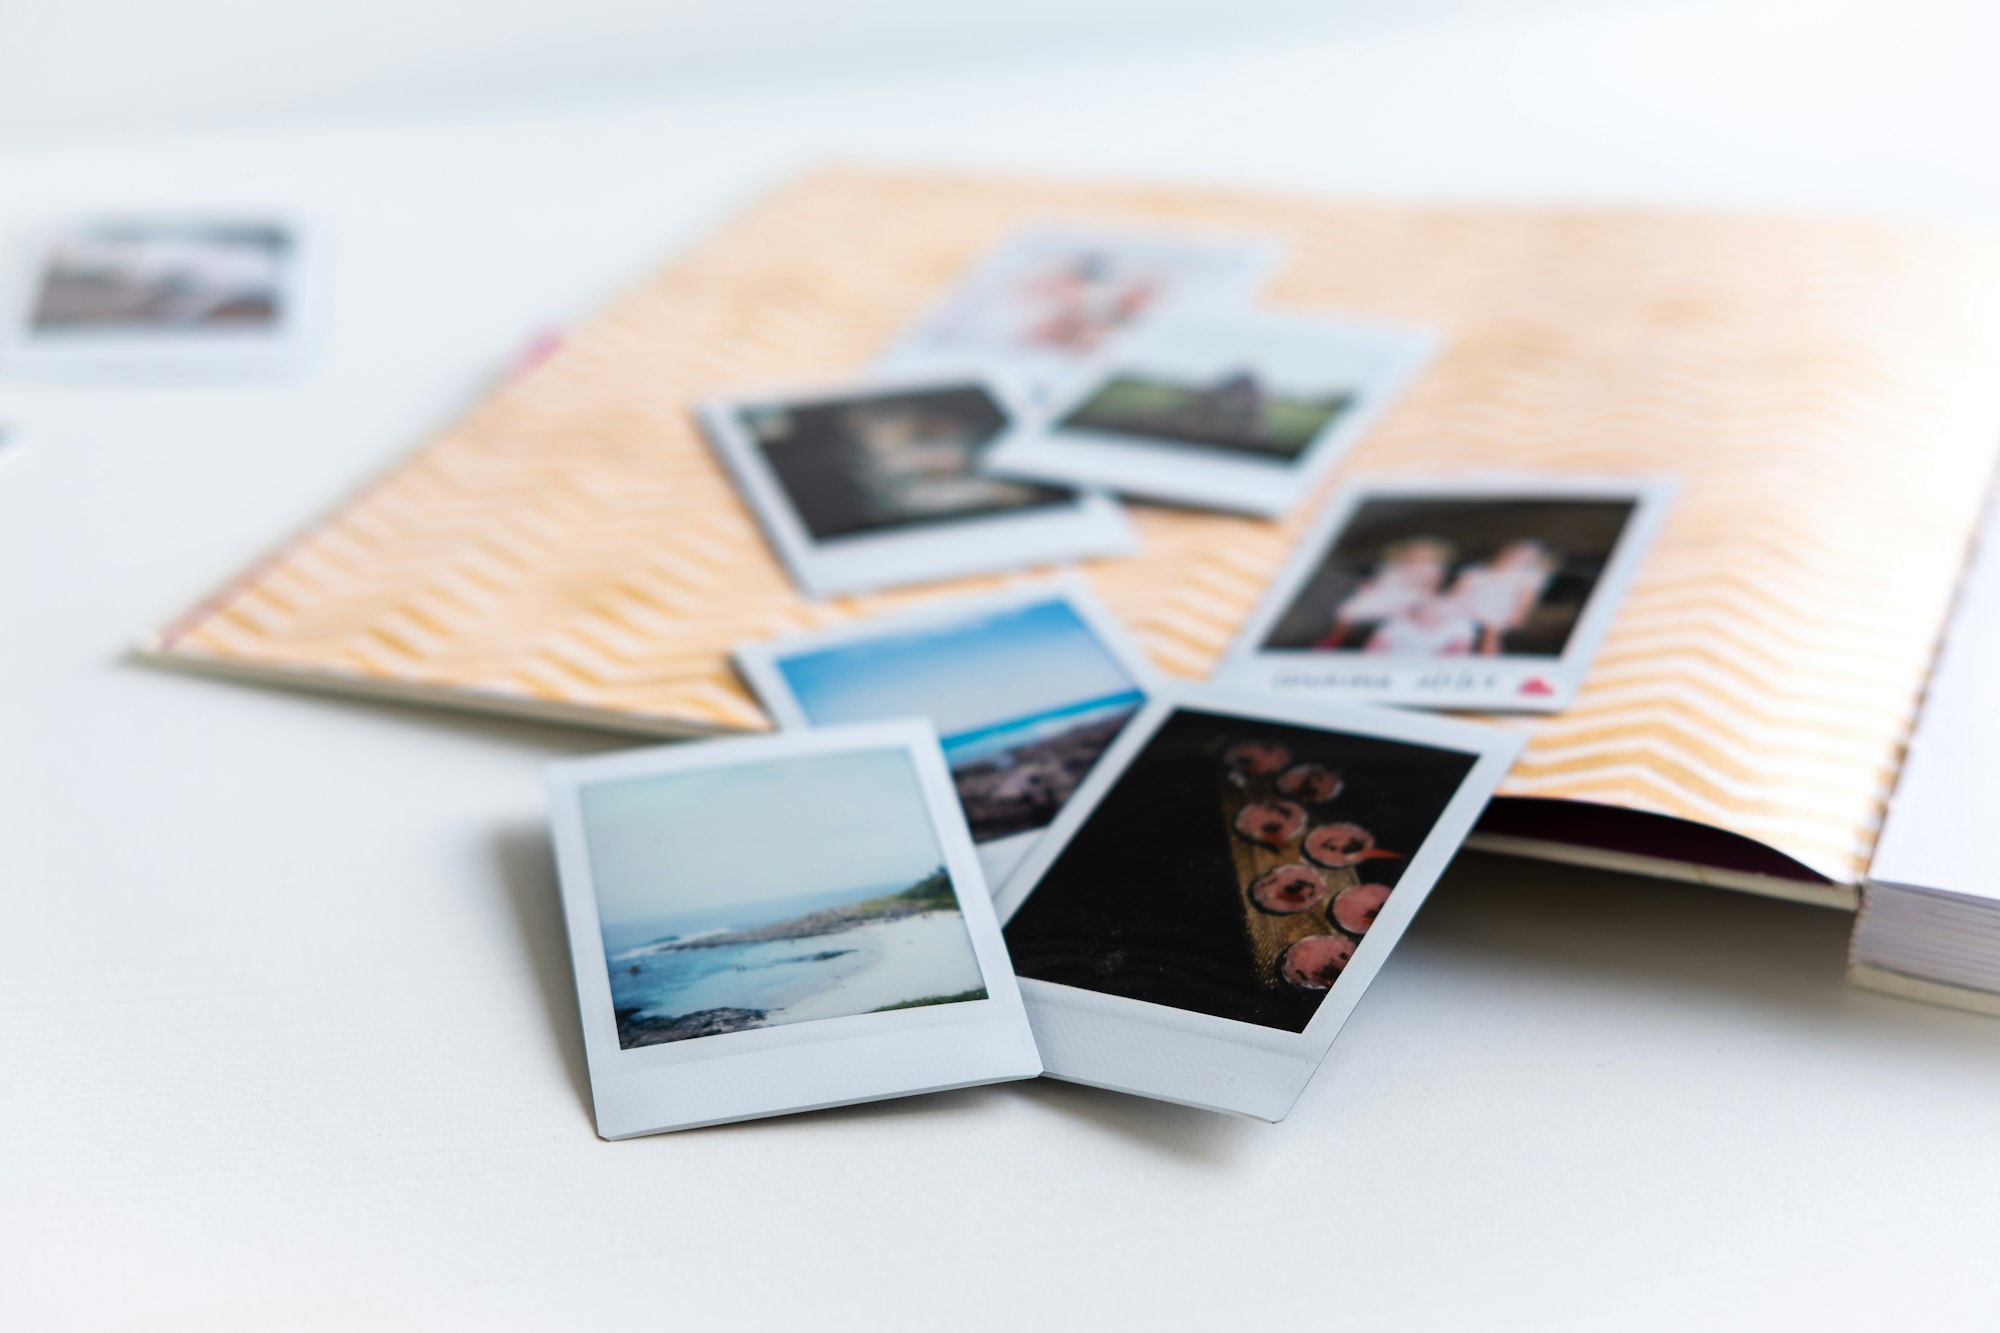 Creating a little book full of happy memories... and polaroids.